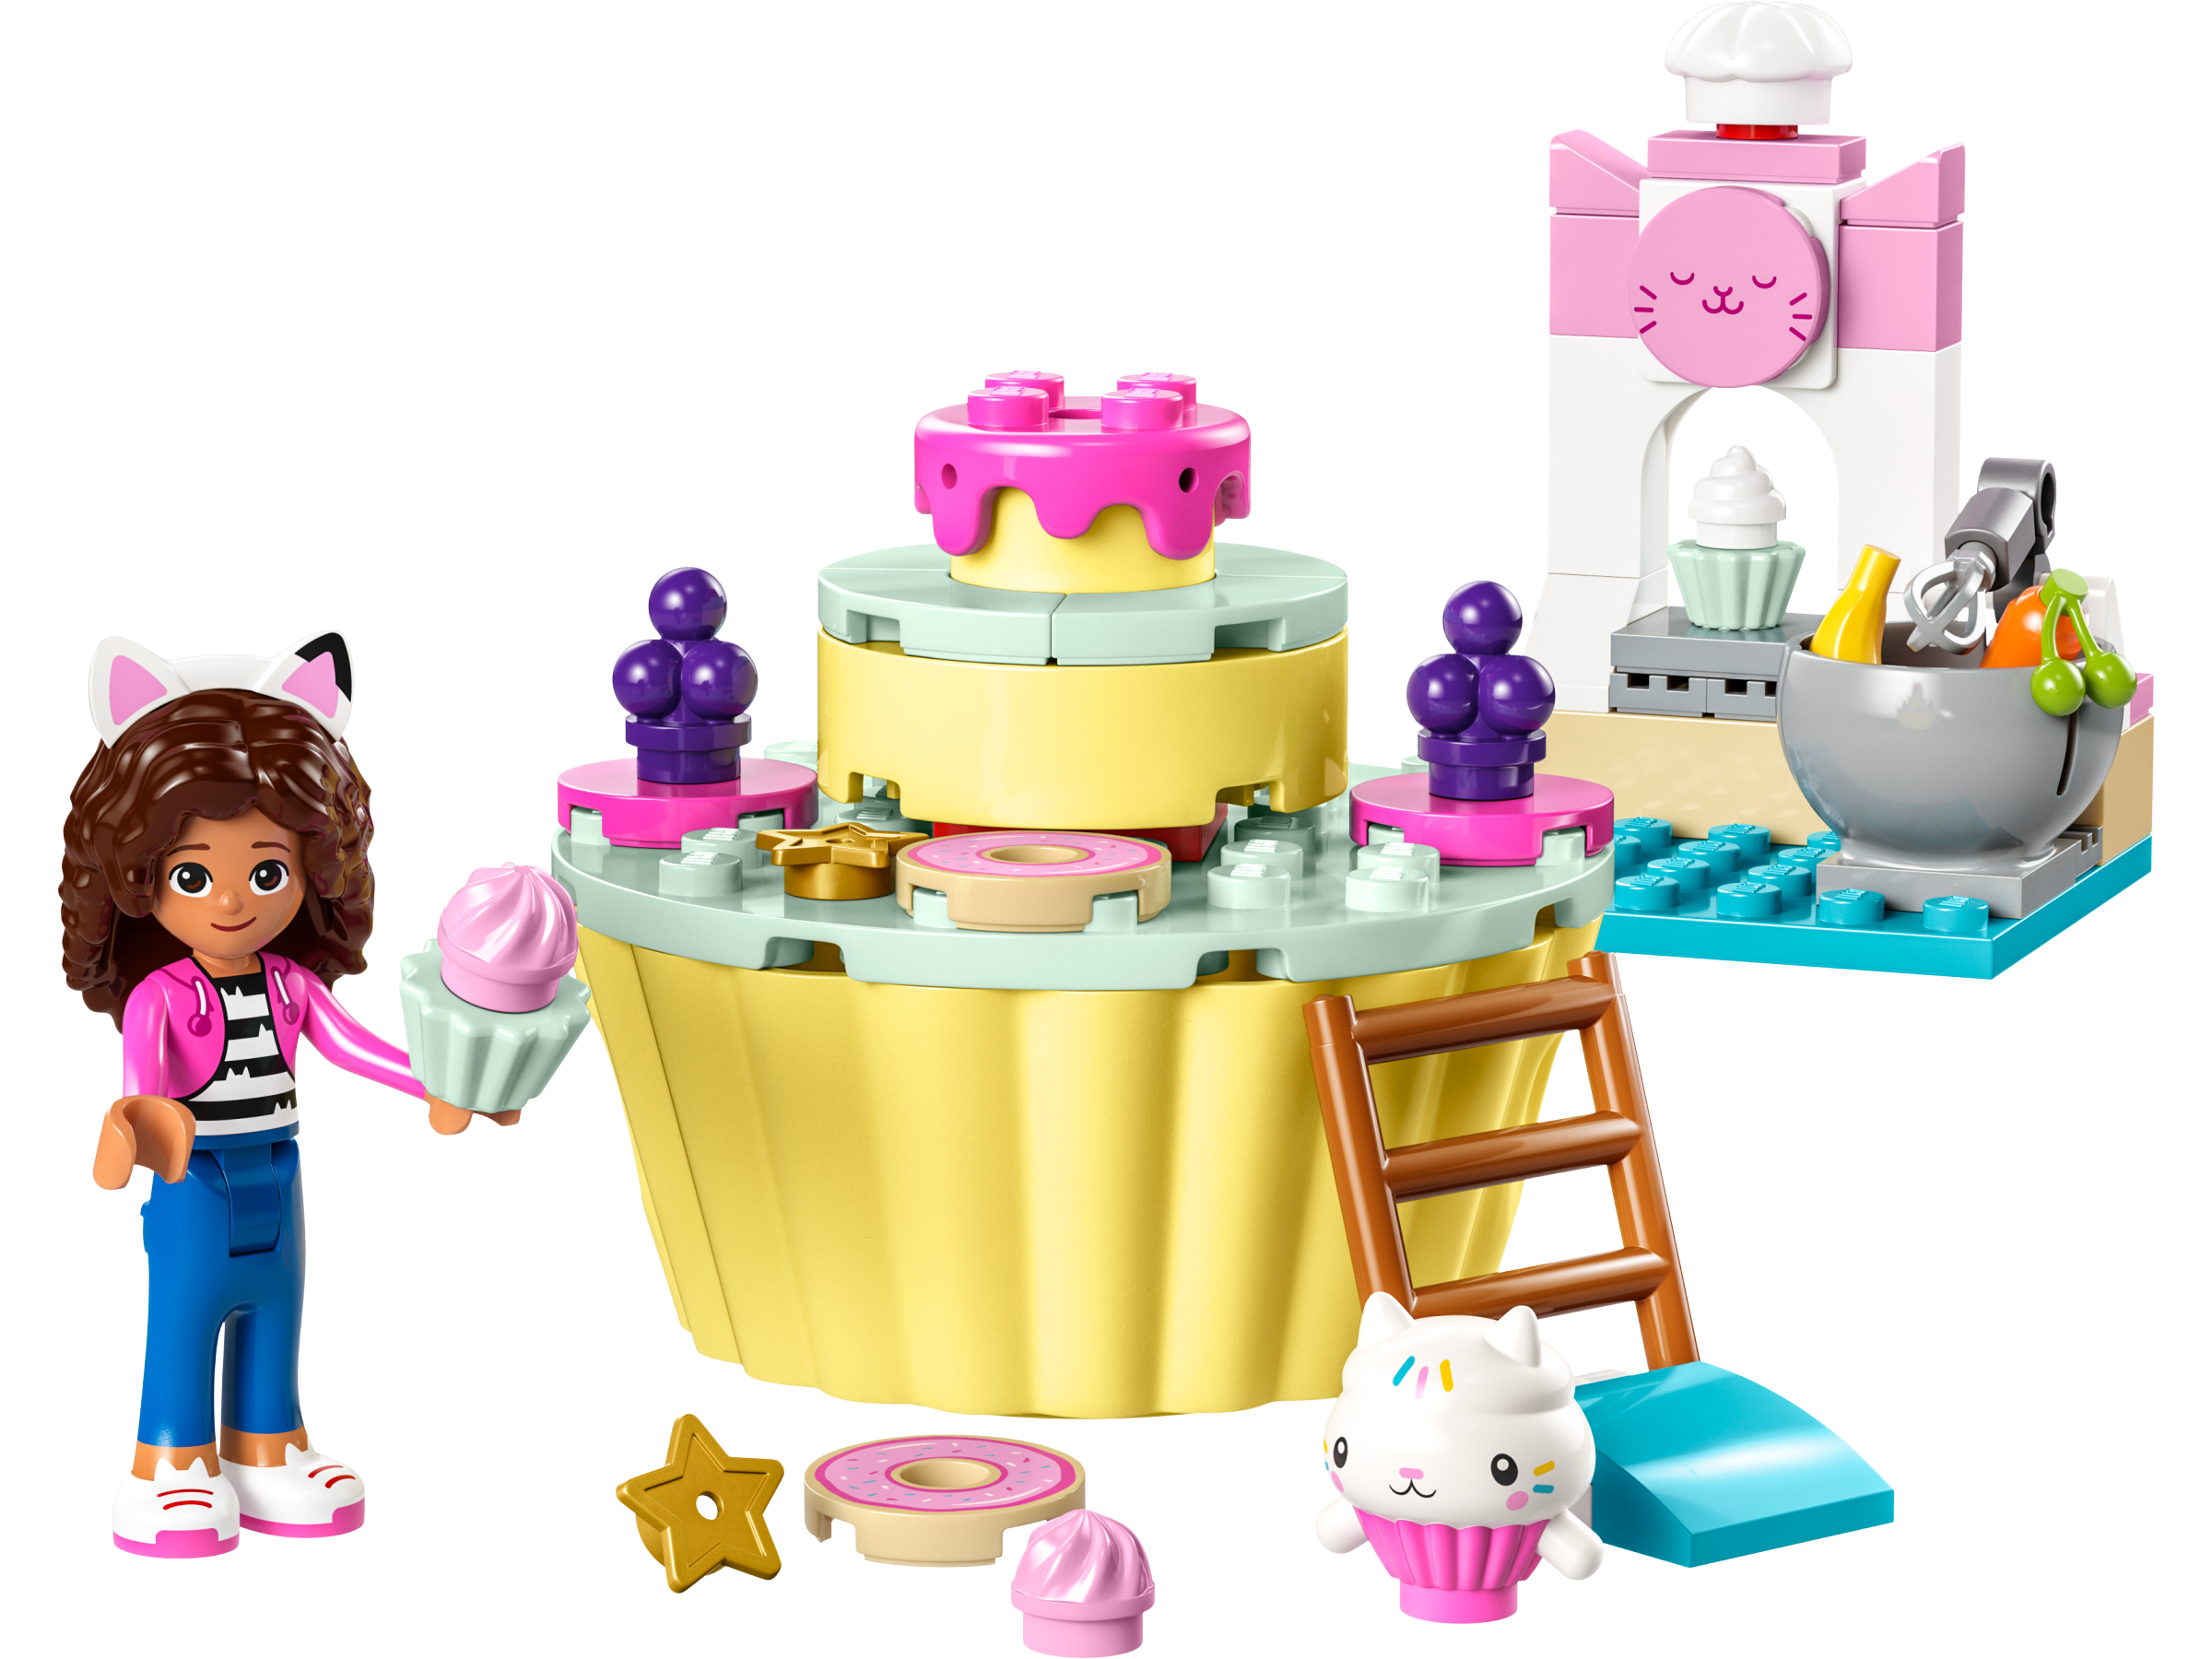 Bakey with Cakey Fun 10785 | LEGO® Gabby's Dollhouse | Buy online at the  Official LEGO® Shop GB